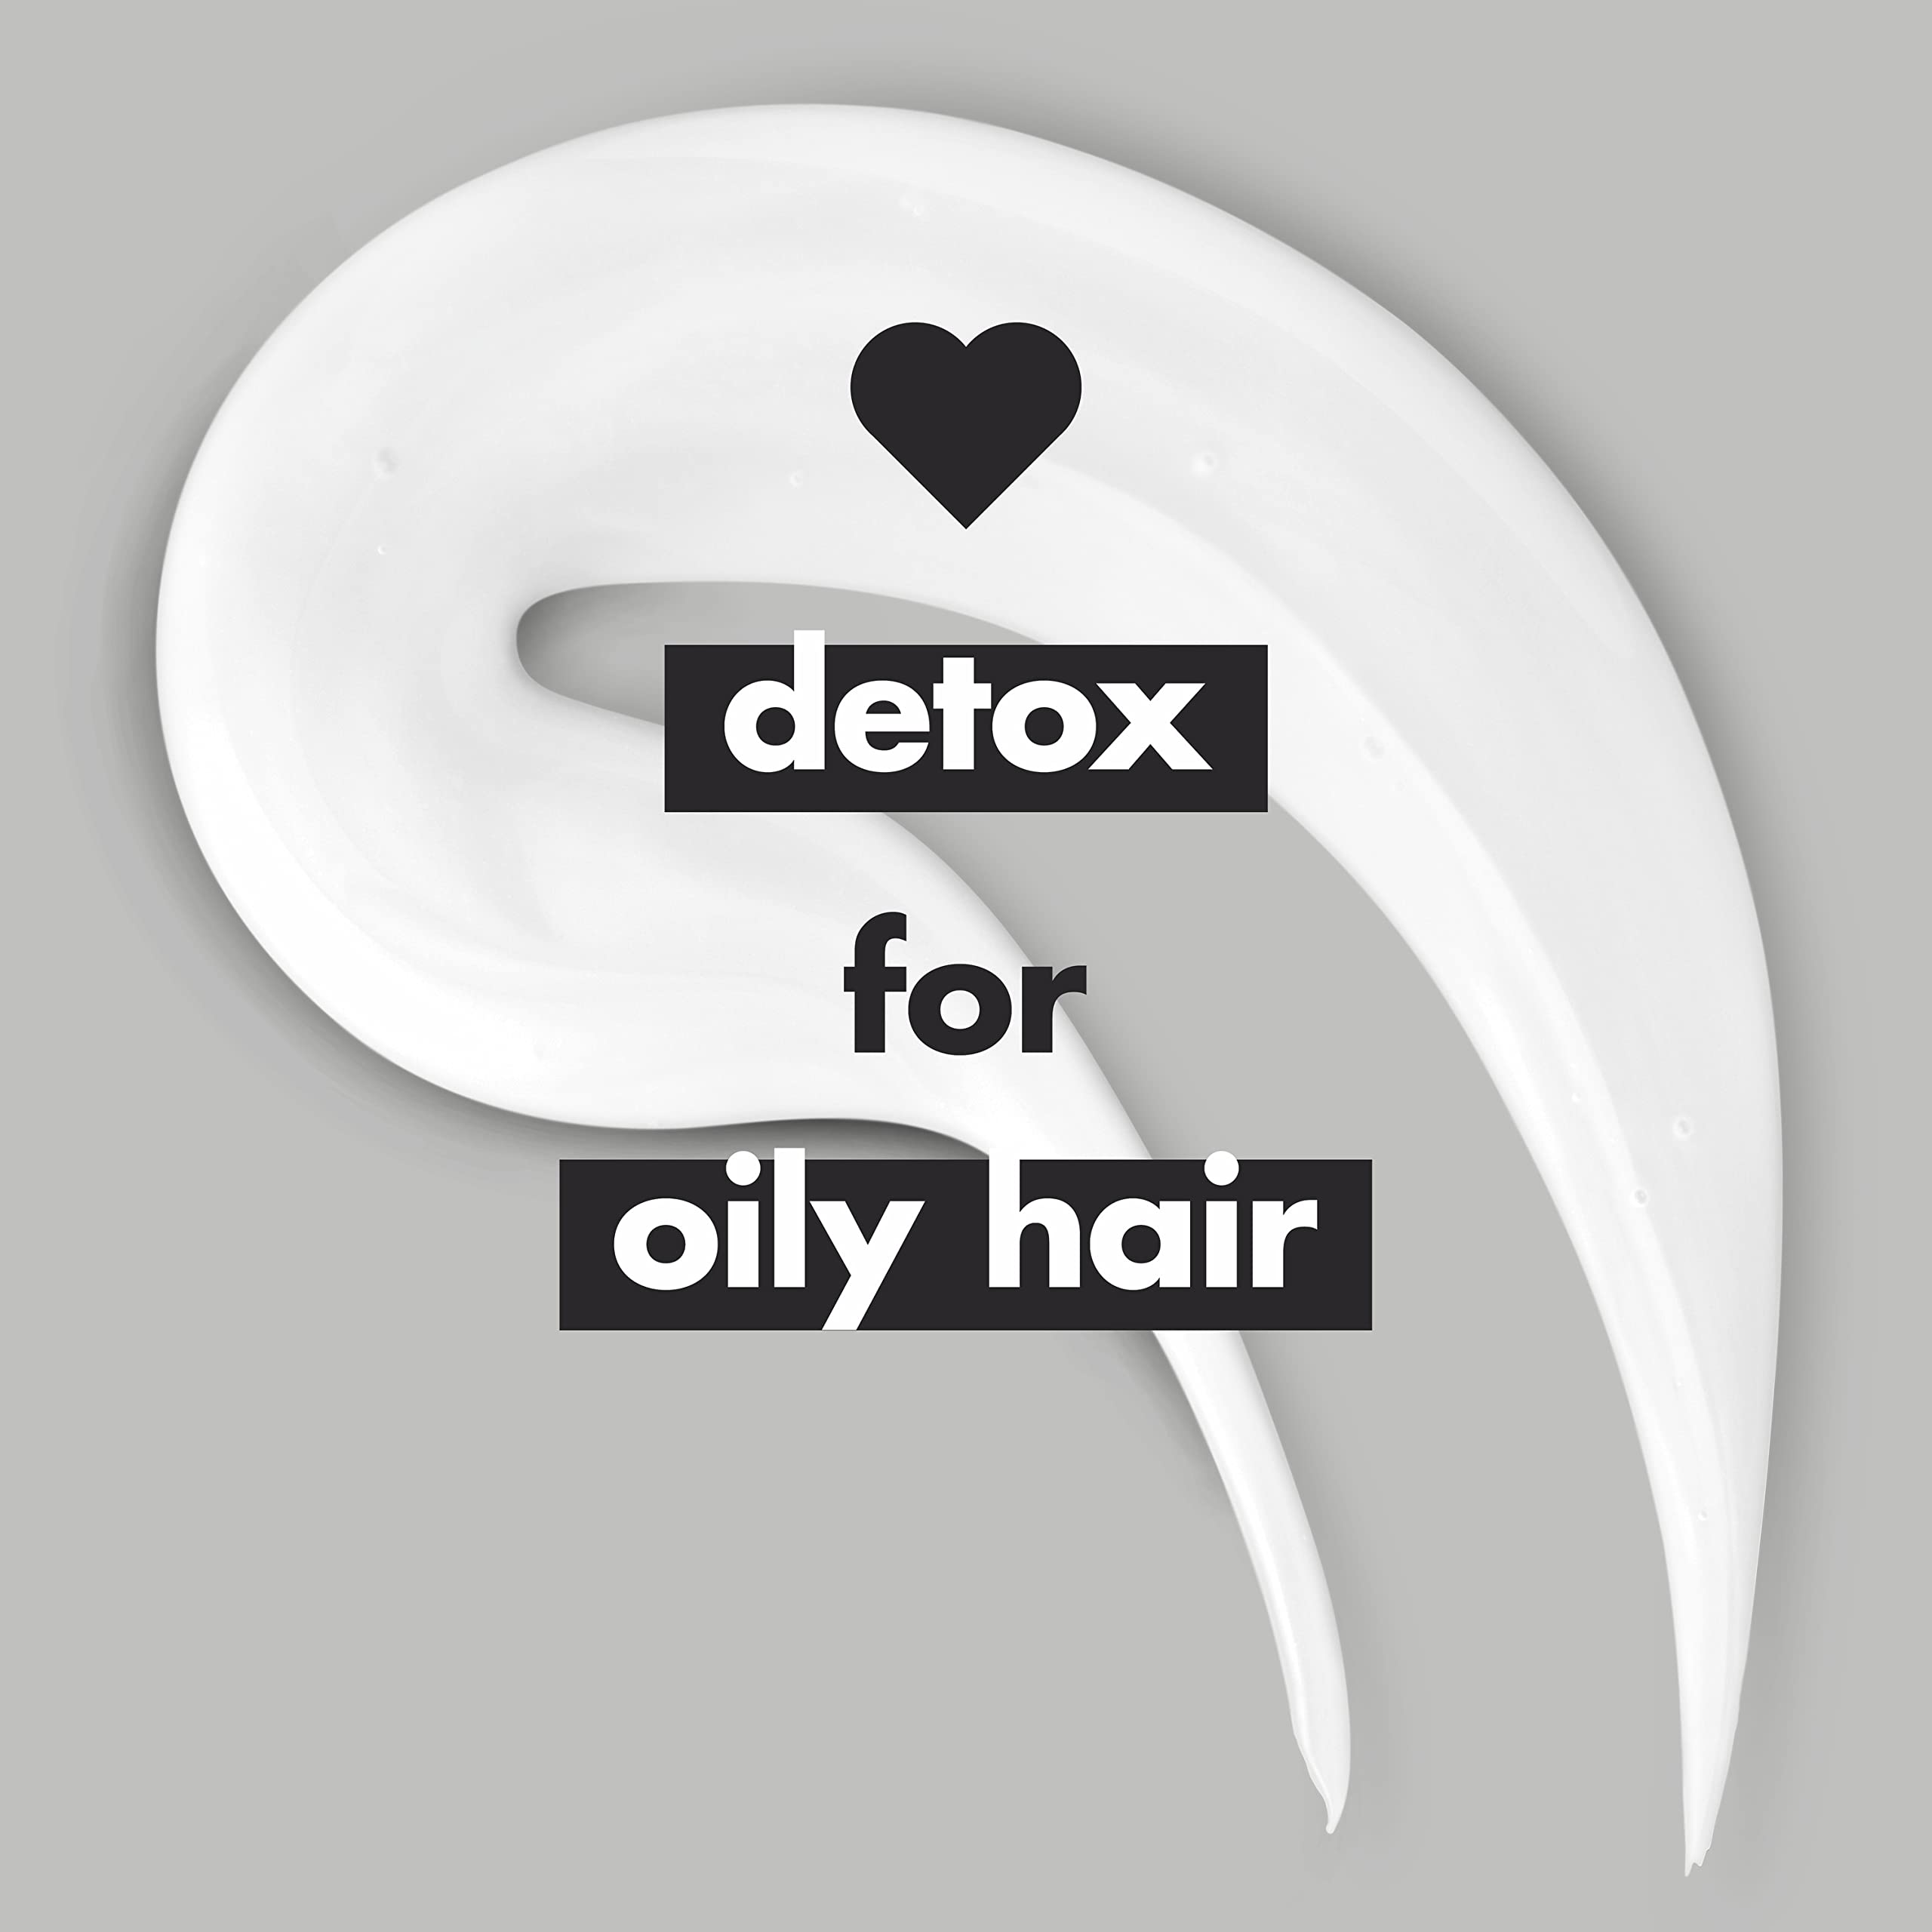 Love Beauty and Planet Delightful Detox Daily Clarifying Sulfate-Free Shampoo Charcoal and Bergamot Cleansed Hair Care Silicone-free, Paraben-free, Vegan Shampoo 32.3 oz